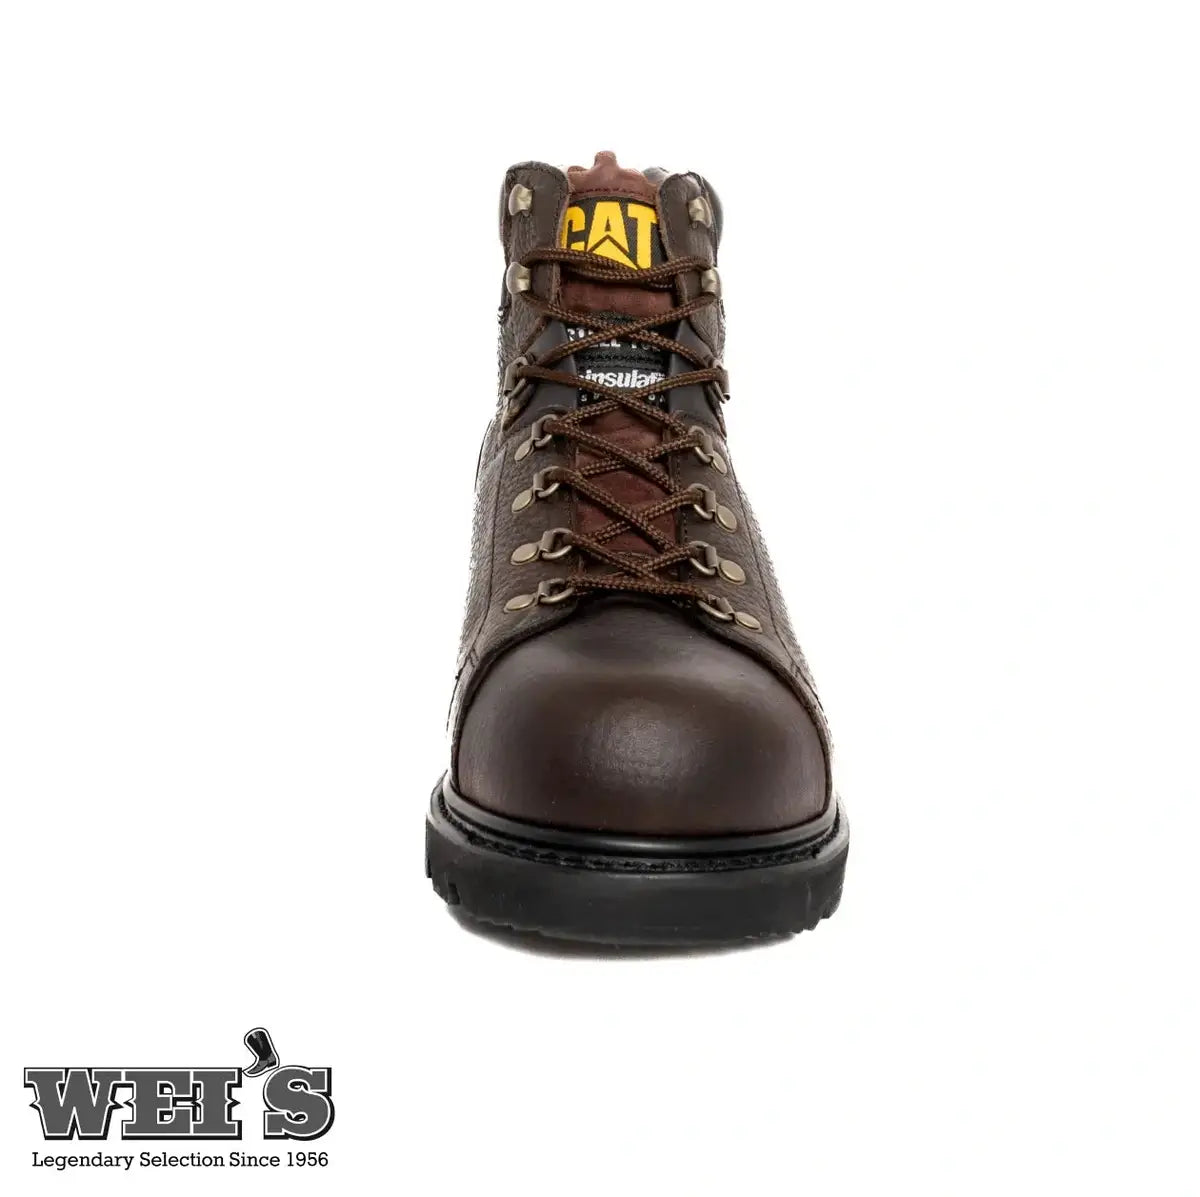 CAT Troy 2 Men's 6" Dark brown CSA Boots - 703096 - Clearance - Clearance